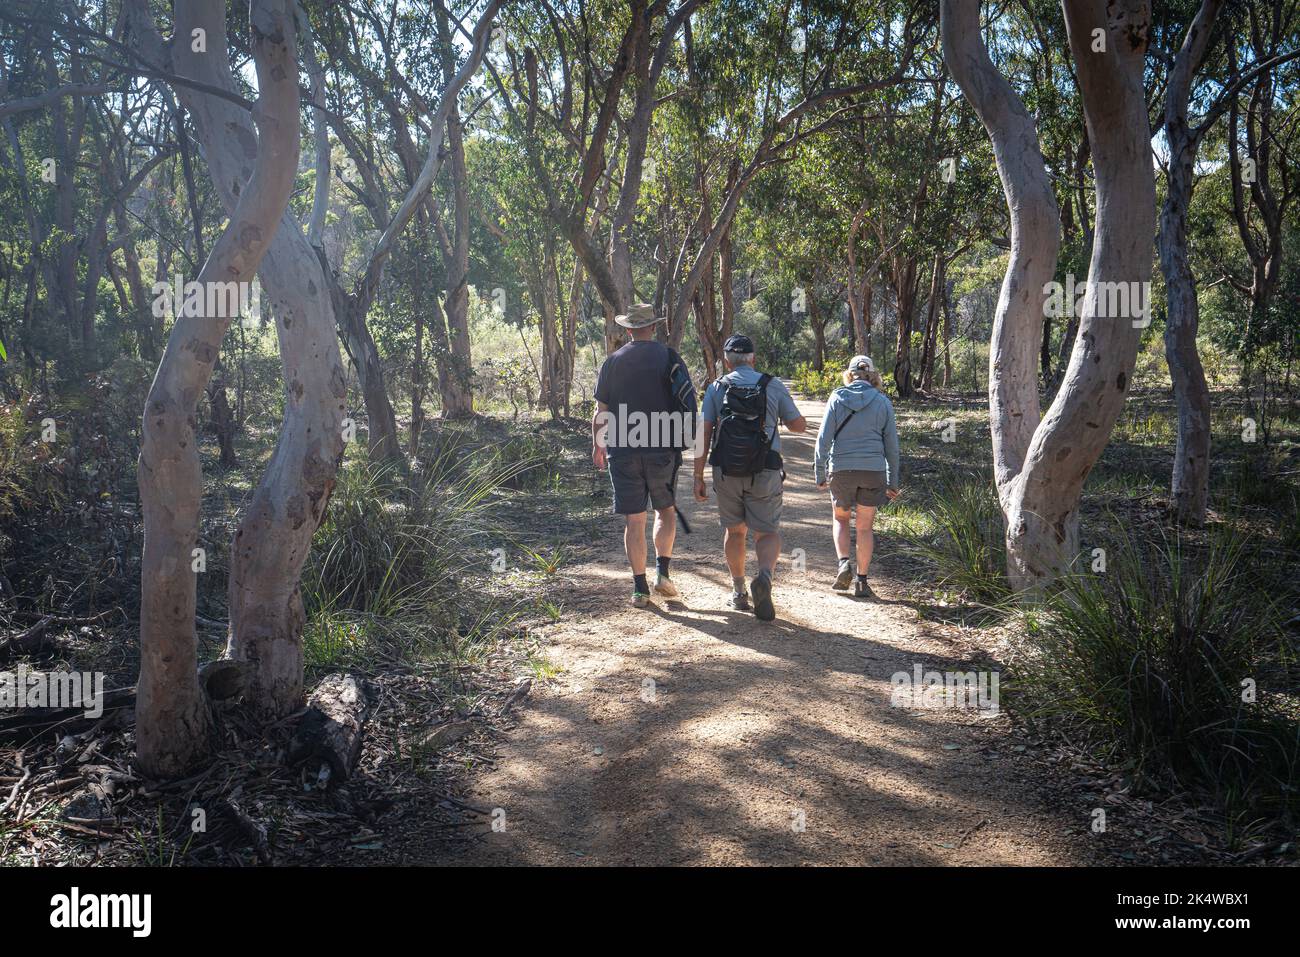 Rear view of three people Hiking in Girraween National Park, Queensland, Australia Stock Photo